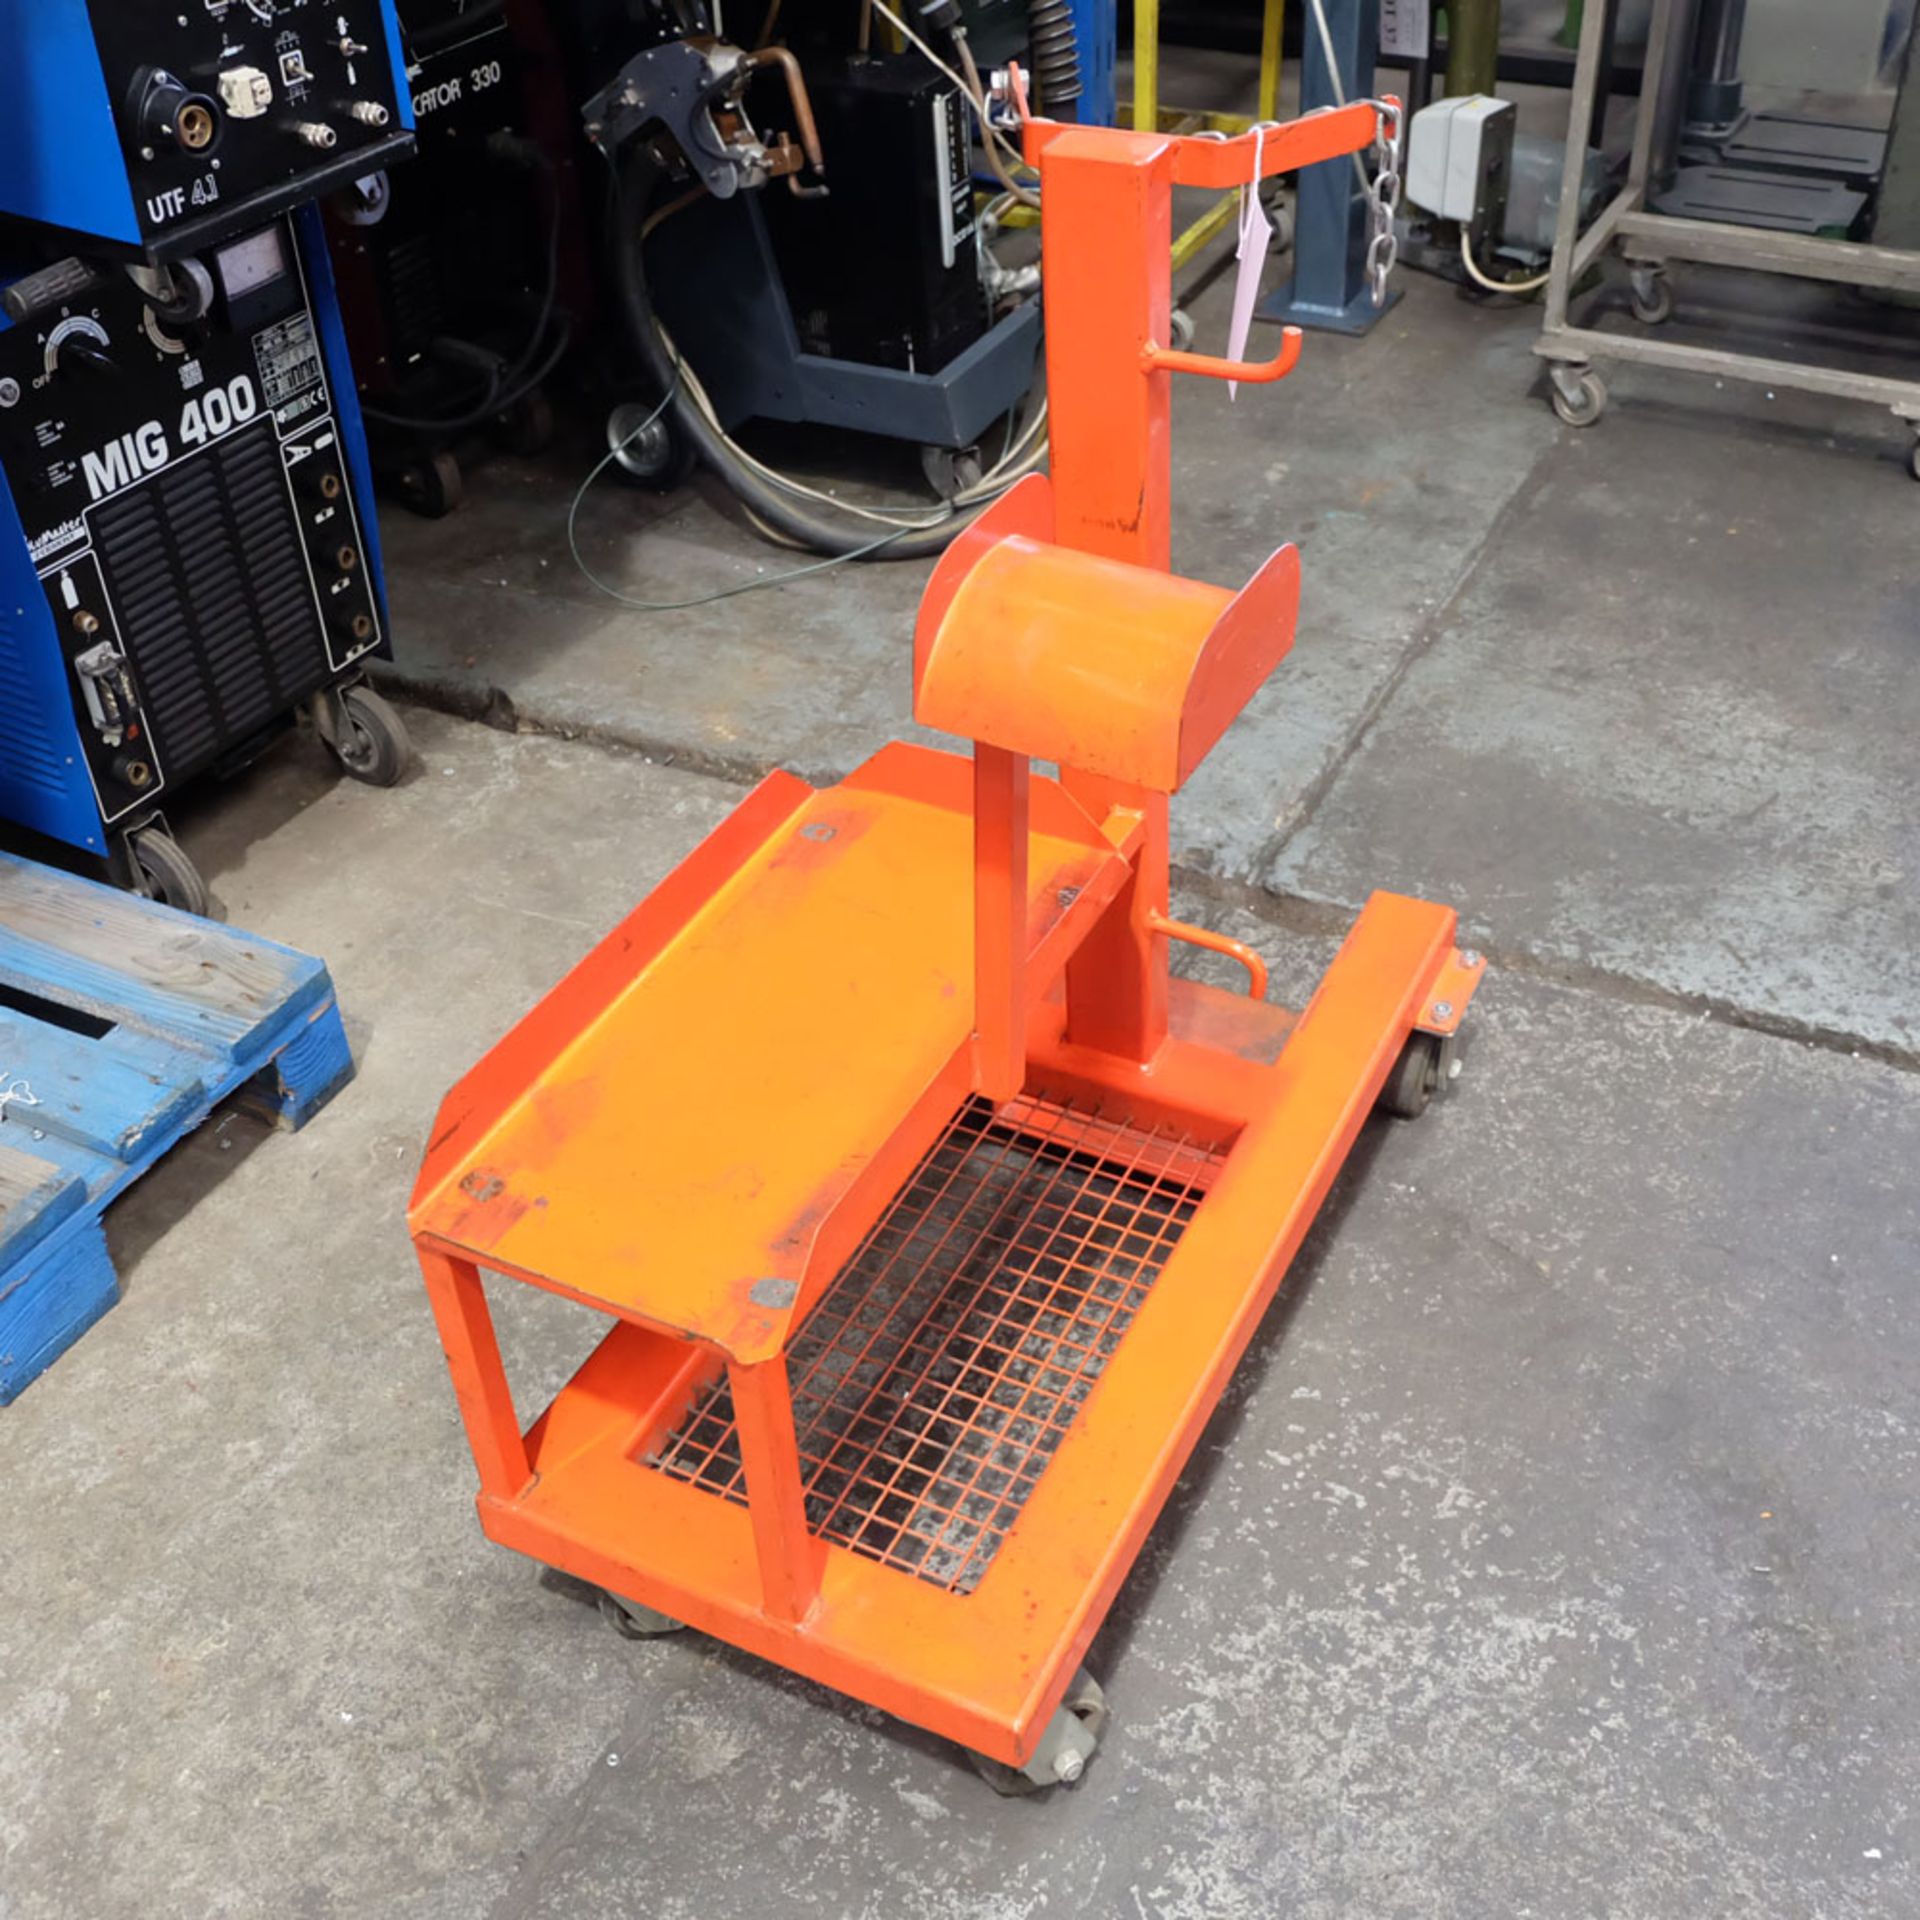 Welding Trolley. Approx Length 36" x 16 1/2" Width. Overall Height Approx 37". - Image 2 of 5